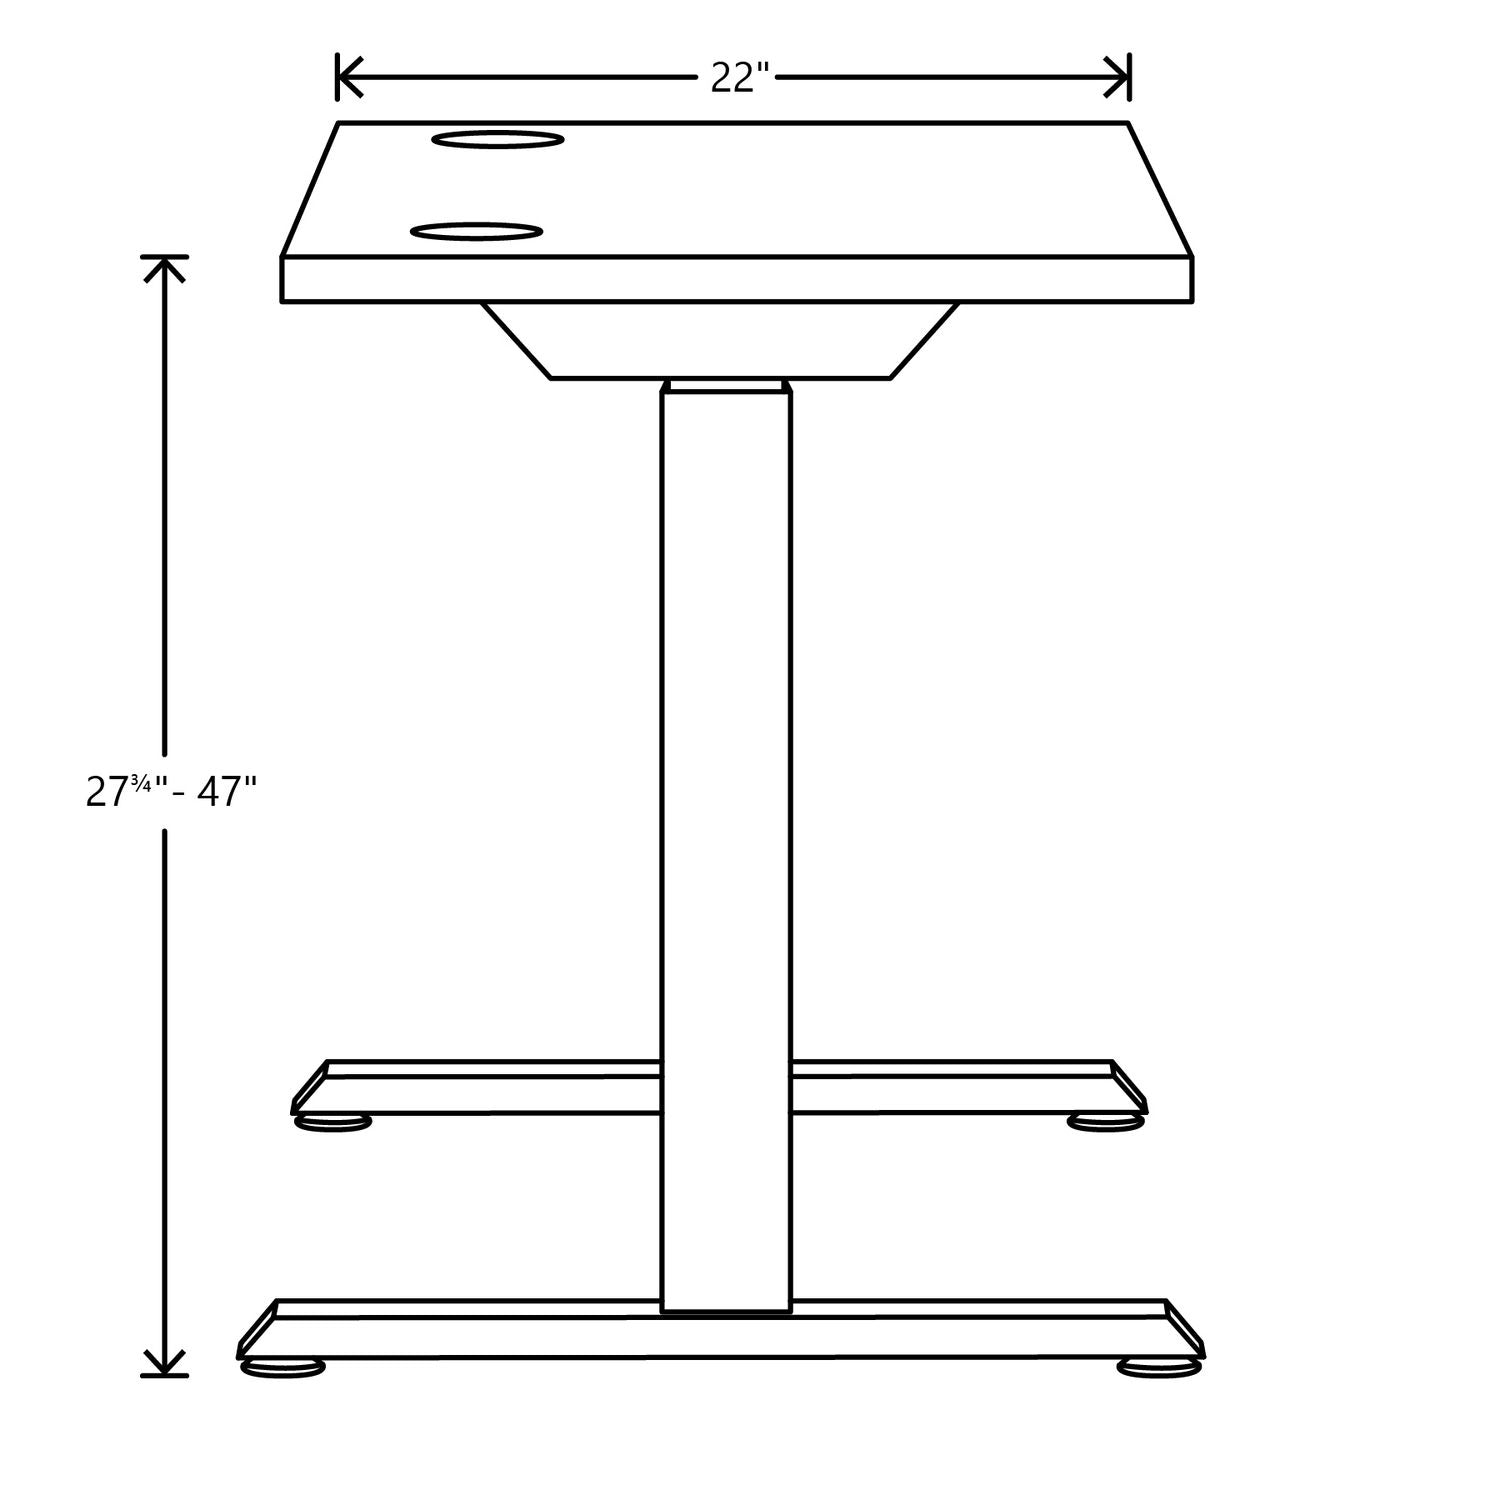 coordinate-height-adjustable-desk-bundle-2-stage-58-x-22-x-2775-to-47-silver-mesh\\silver-ships-in-7-10-business-days_honhat2smsv2258 - 8